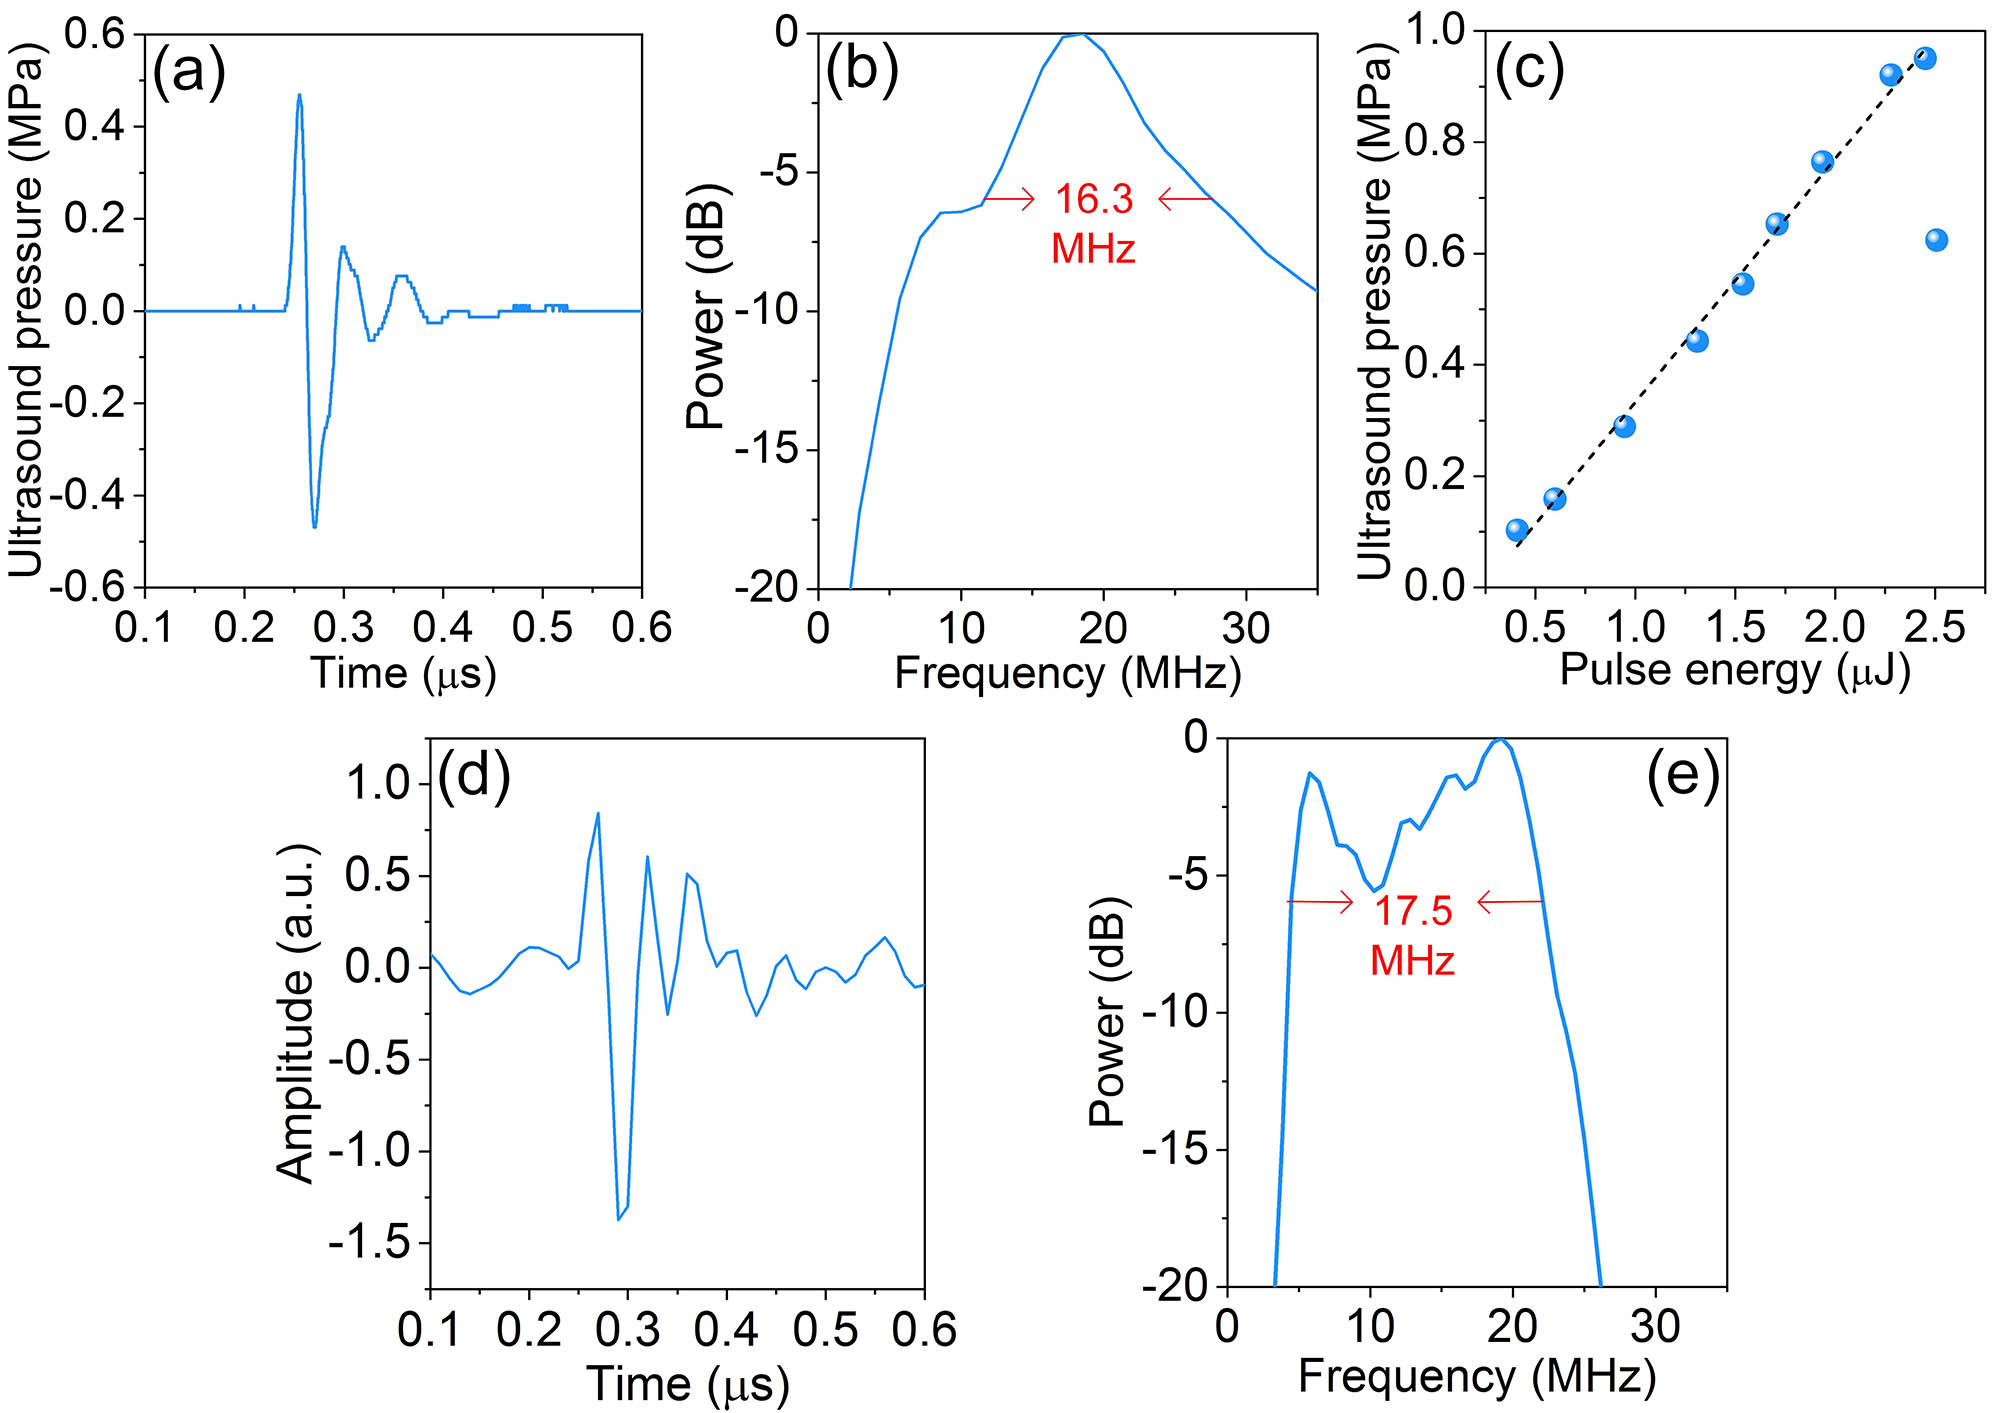 Acoustic characterization. (a) The recorded ultrasound signal and (b) its acoustic spectrum. (c) The measured acoustic pressure versus the light pulse energy. The ultrasound pressure significantly dropped at 2.5 μJ as a result of the damage of the absorptive medium. (d) The recorded echo signal. (e) The calculated frequency response.